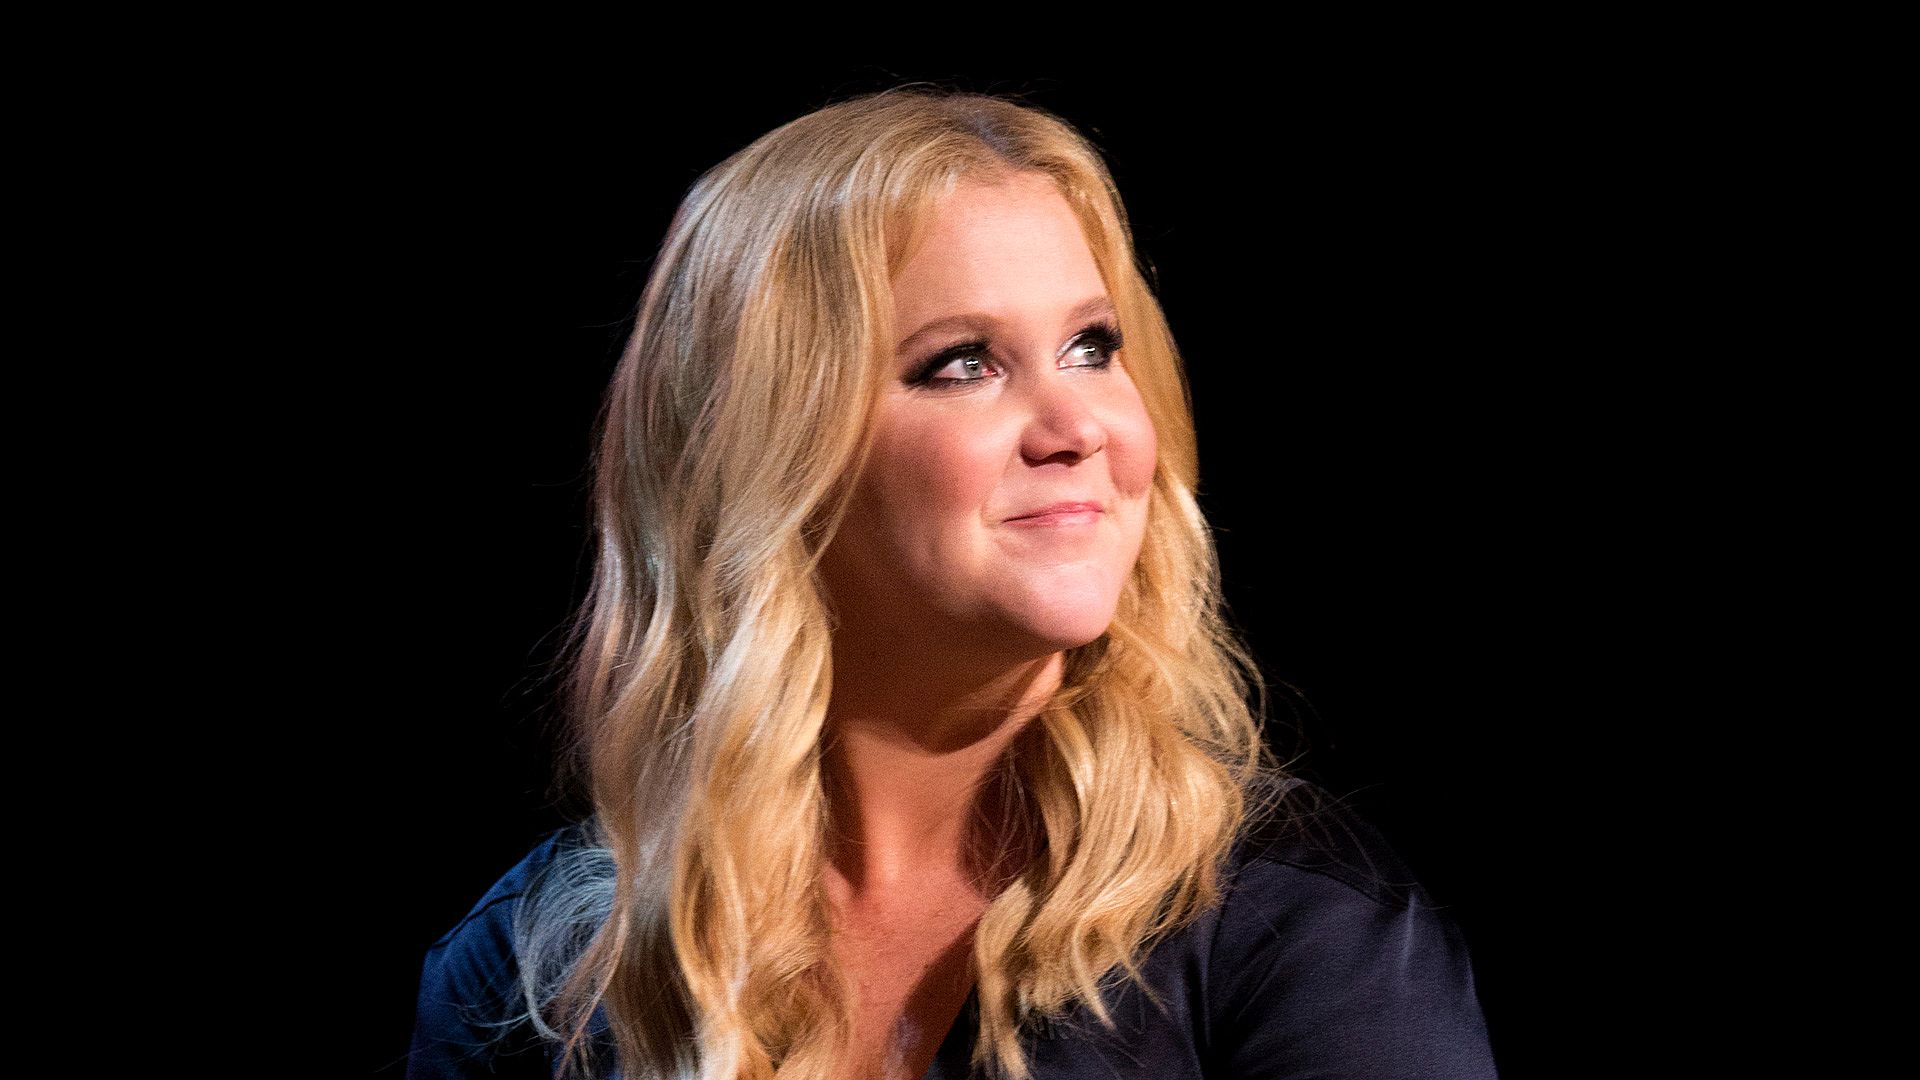 Amy Schumer: Live at the Apollo background